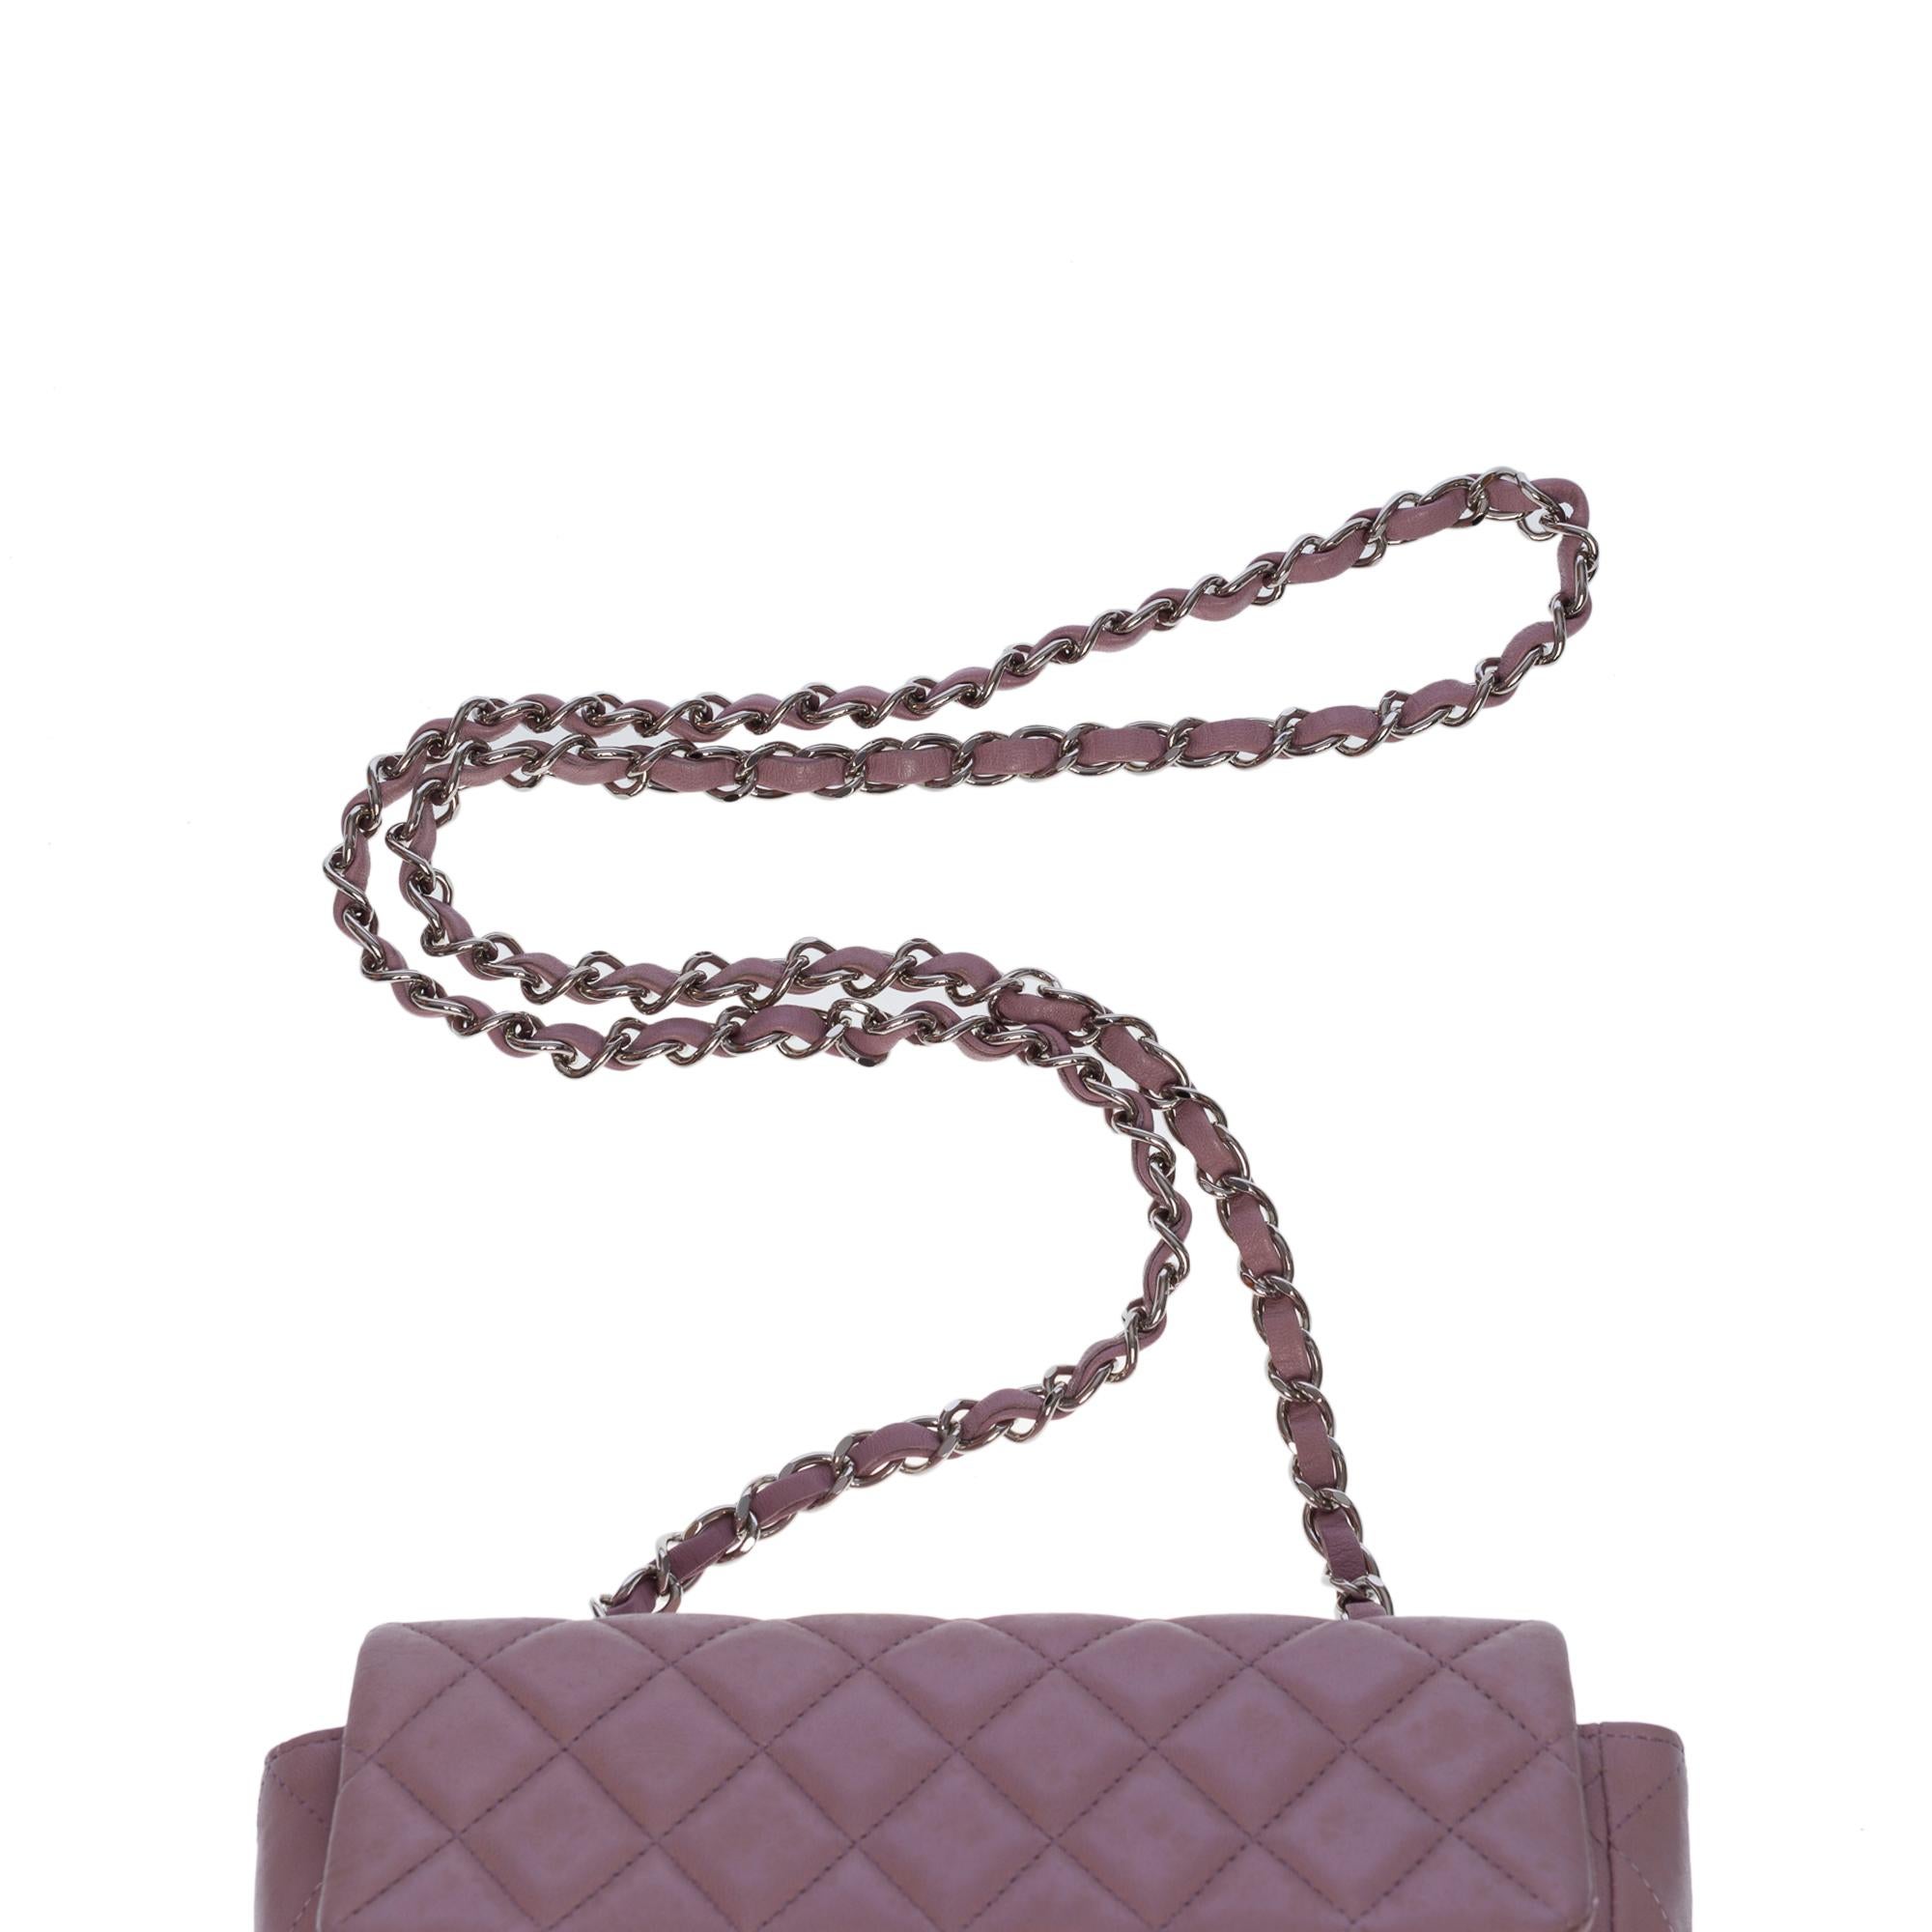 Splendid Chanel Timeless Mini Flap bag in lilac quilted lambskin leather, SHW 5